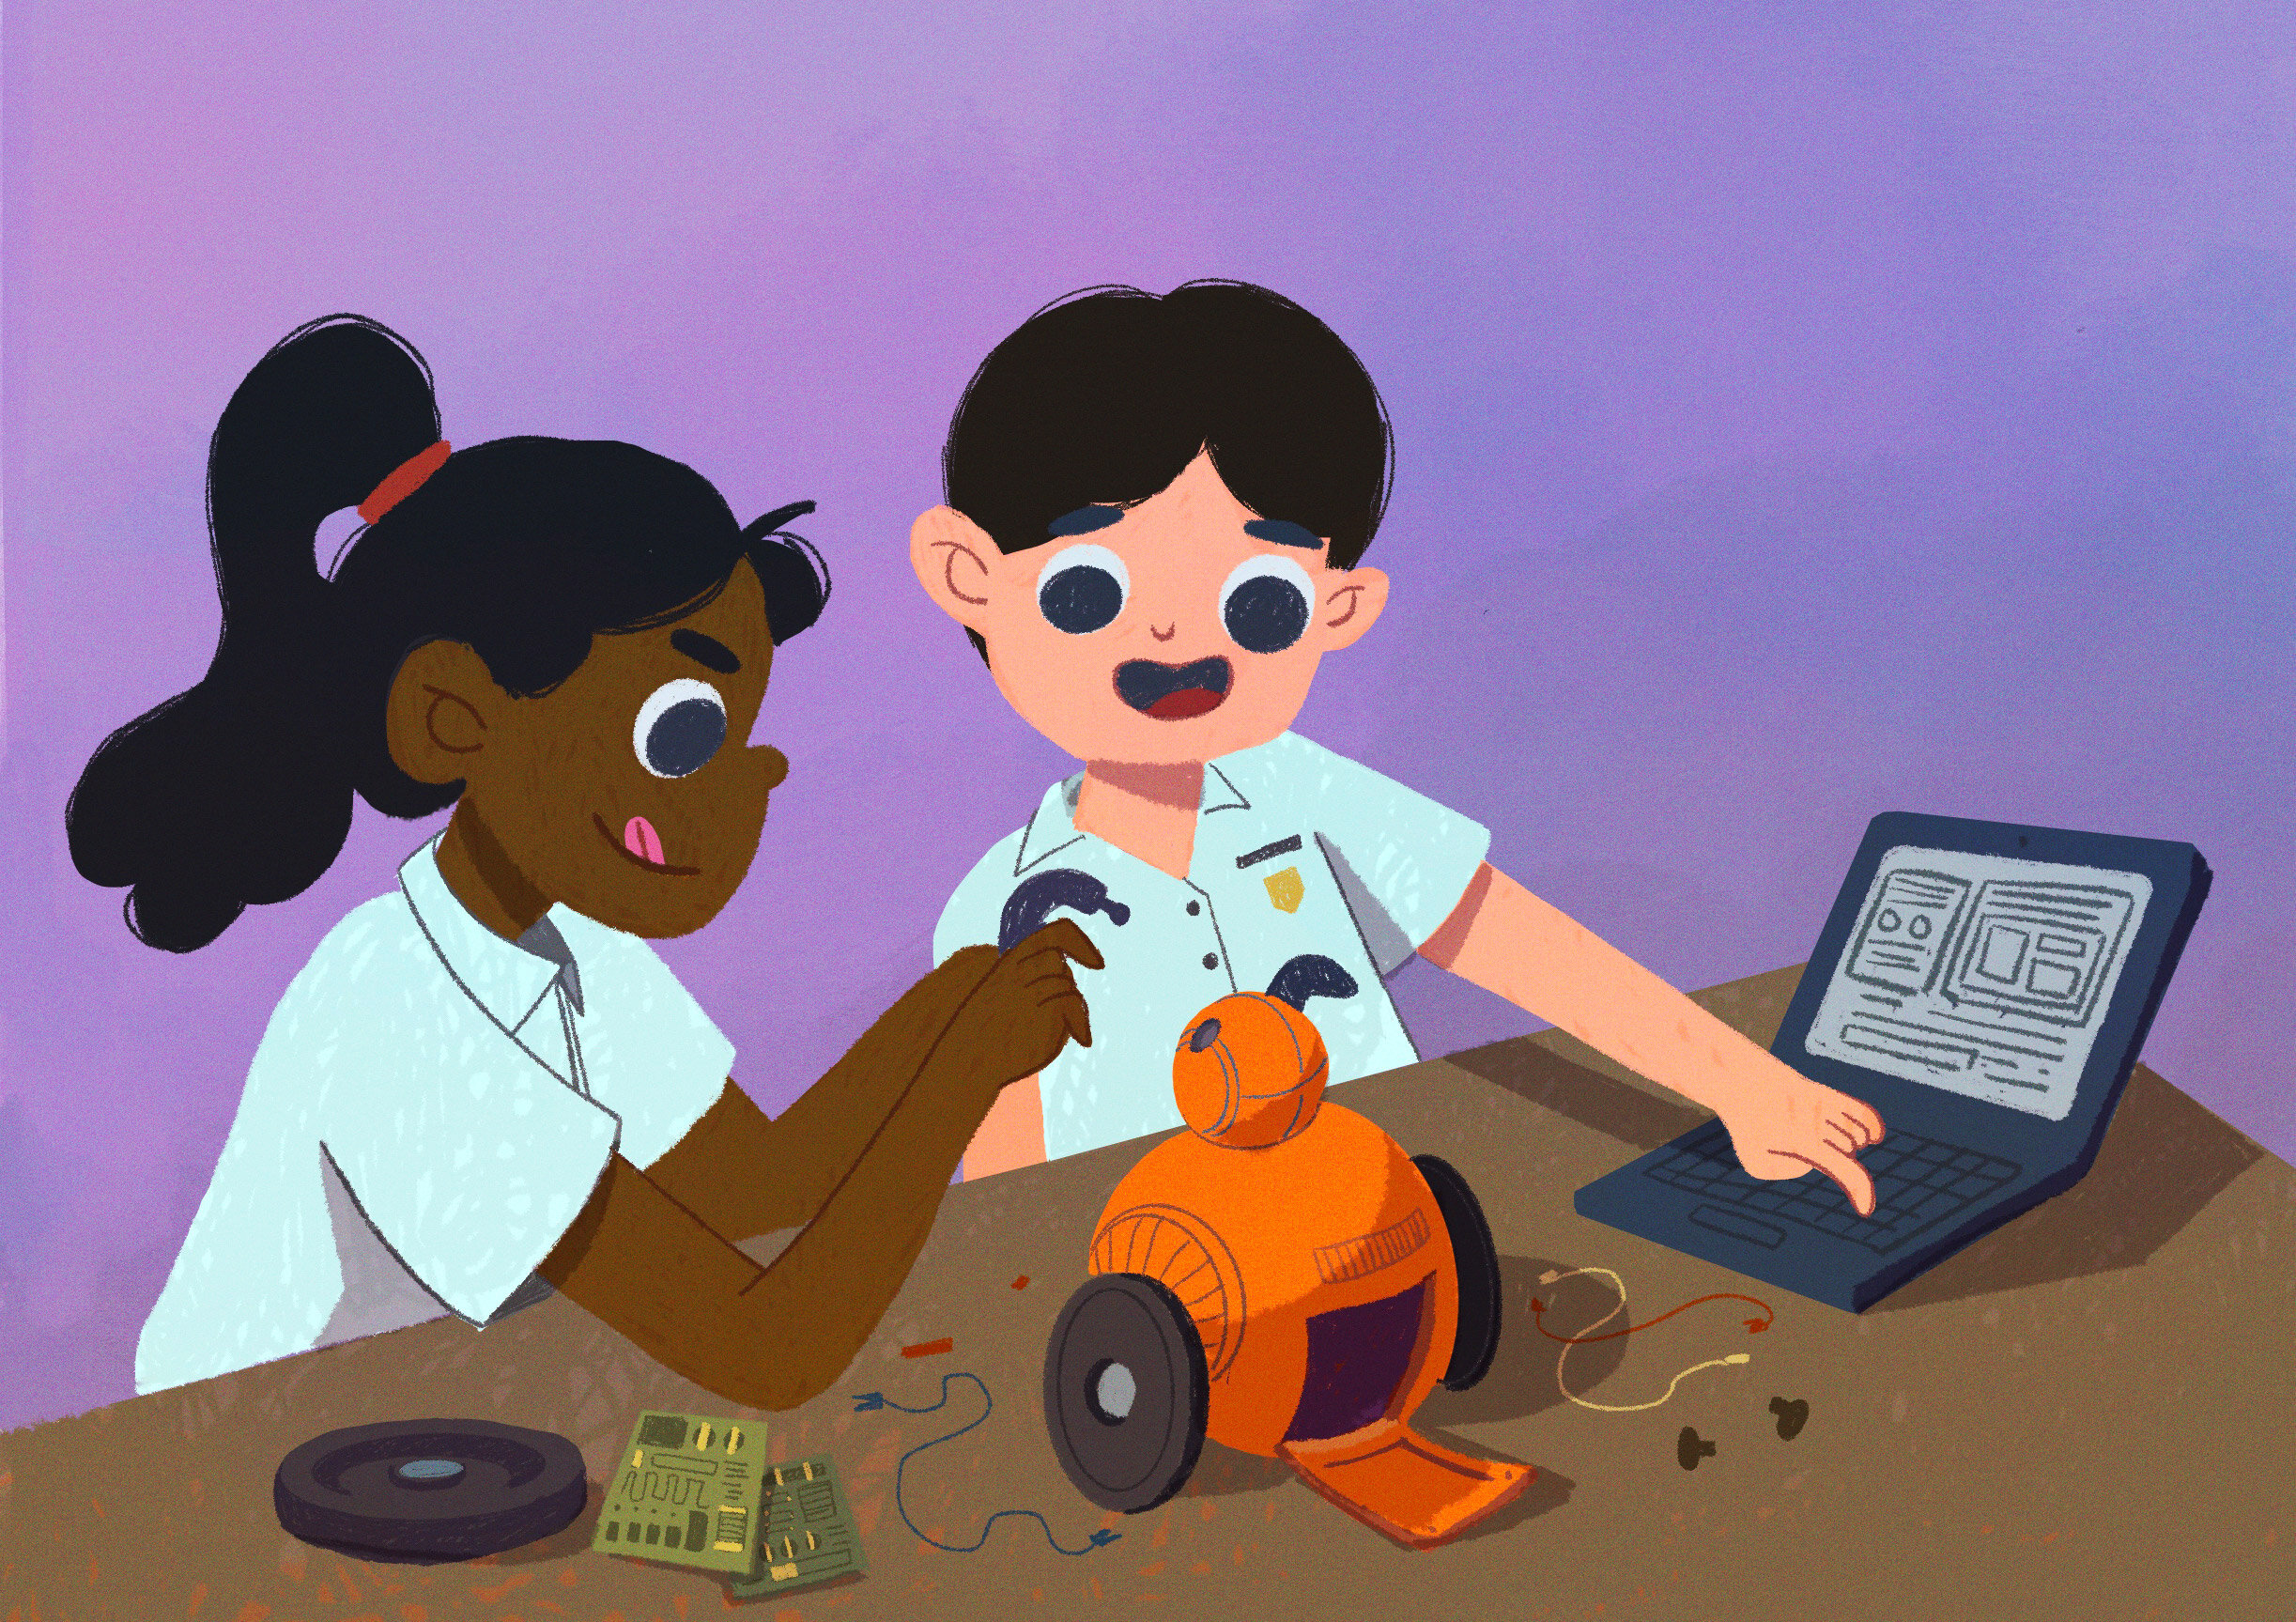  Illustration for RICE Media about Digital Literacy education in Singapore 